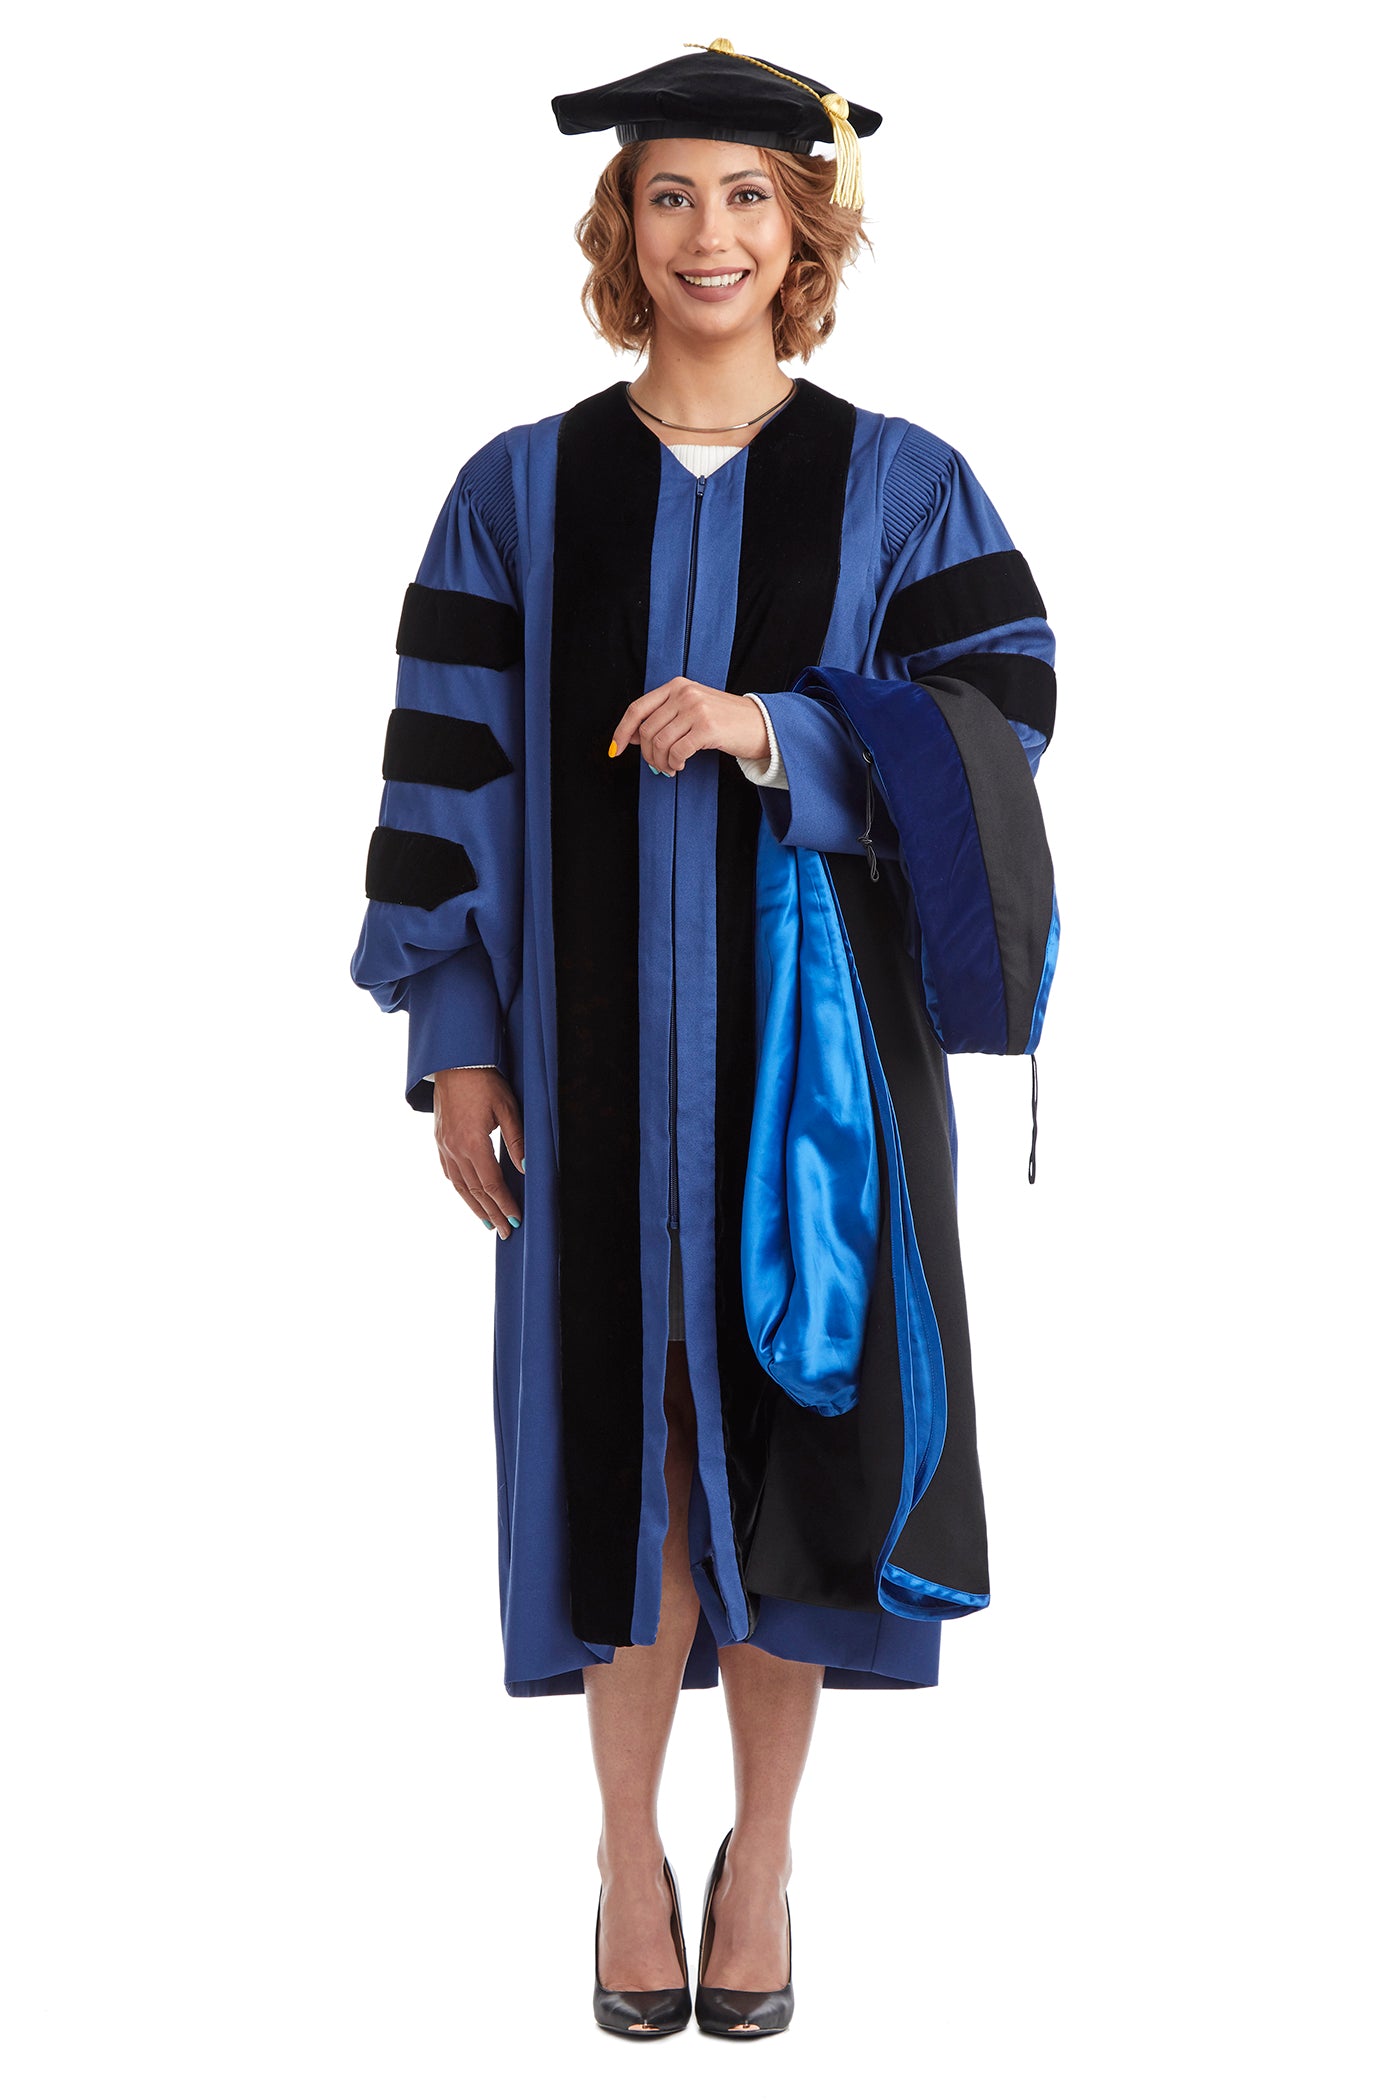 yale phd gown